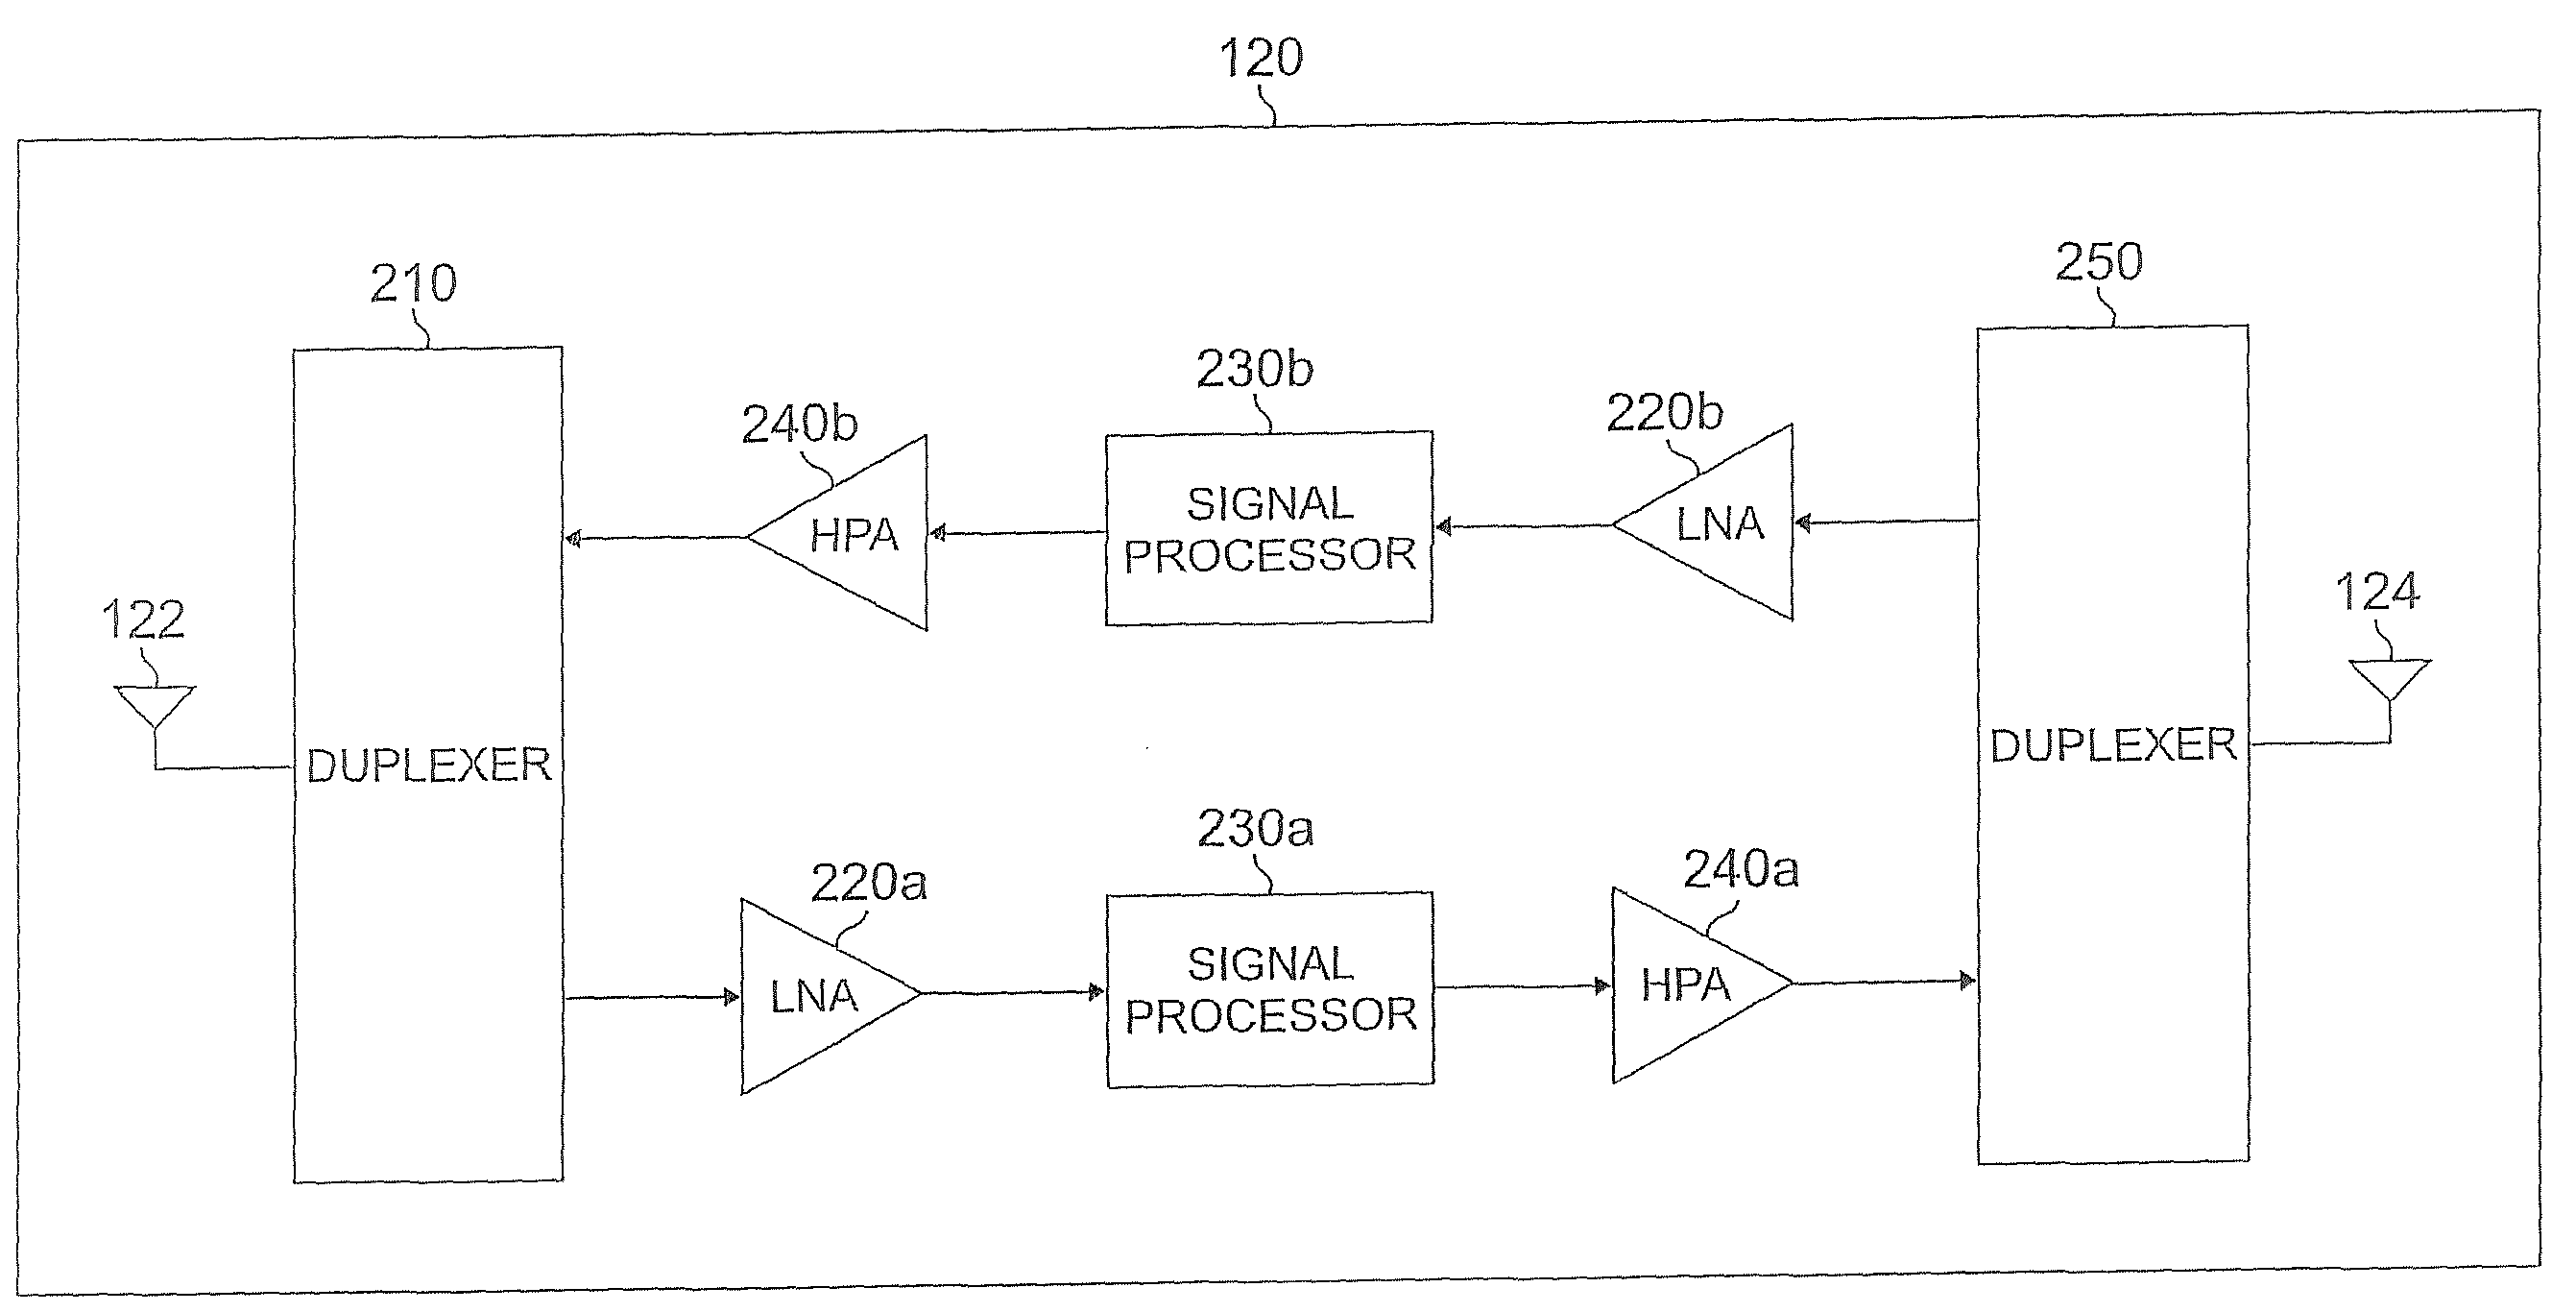 Wireless repeater using cross-polarized signals to reduce feedback in an FDD wireless network